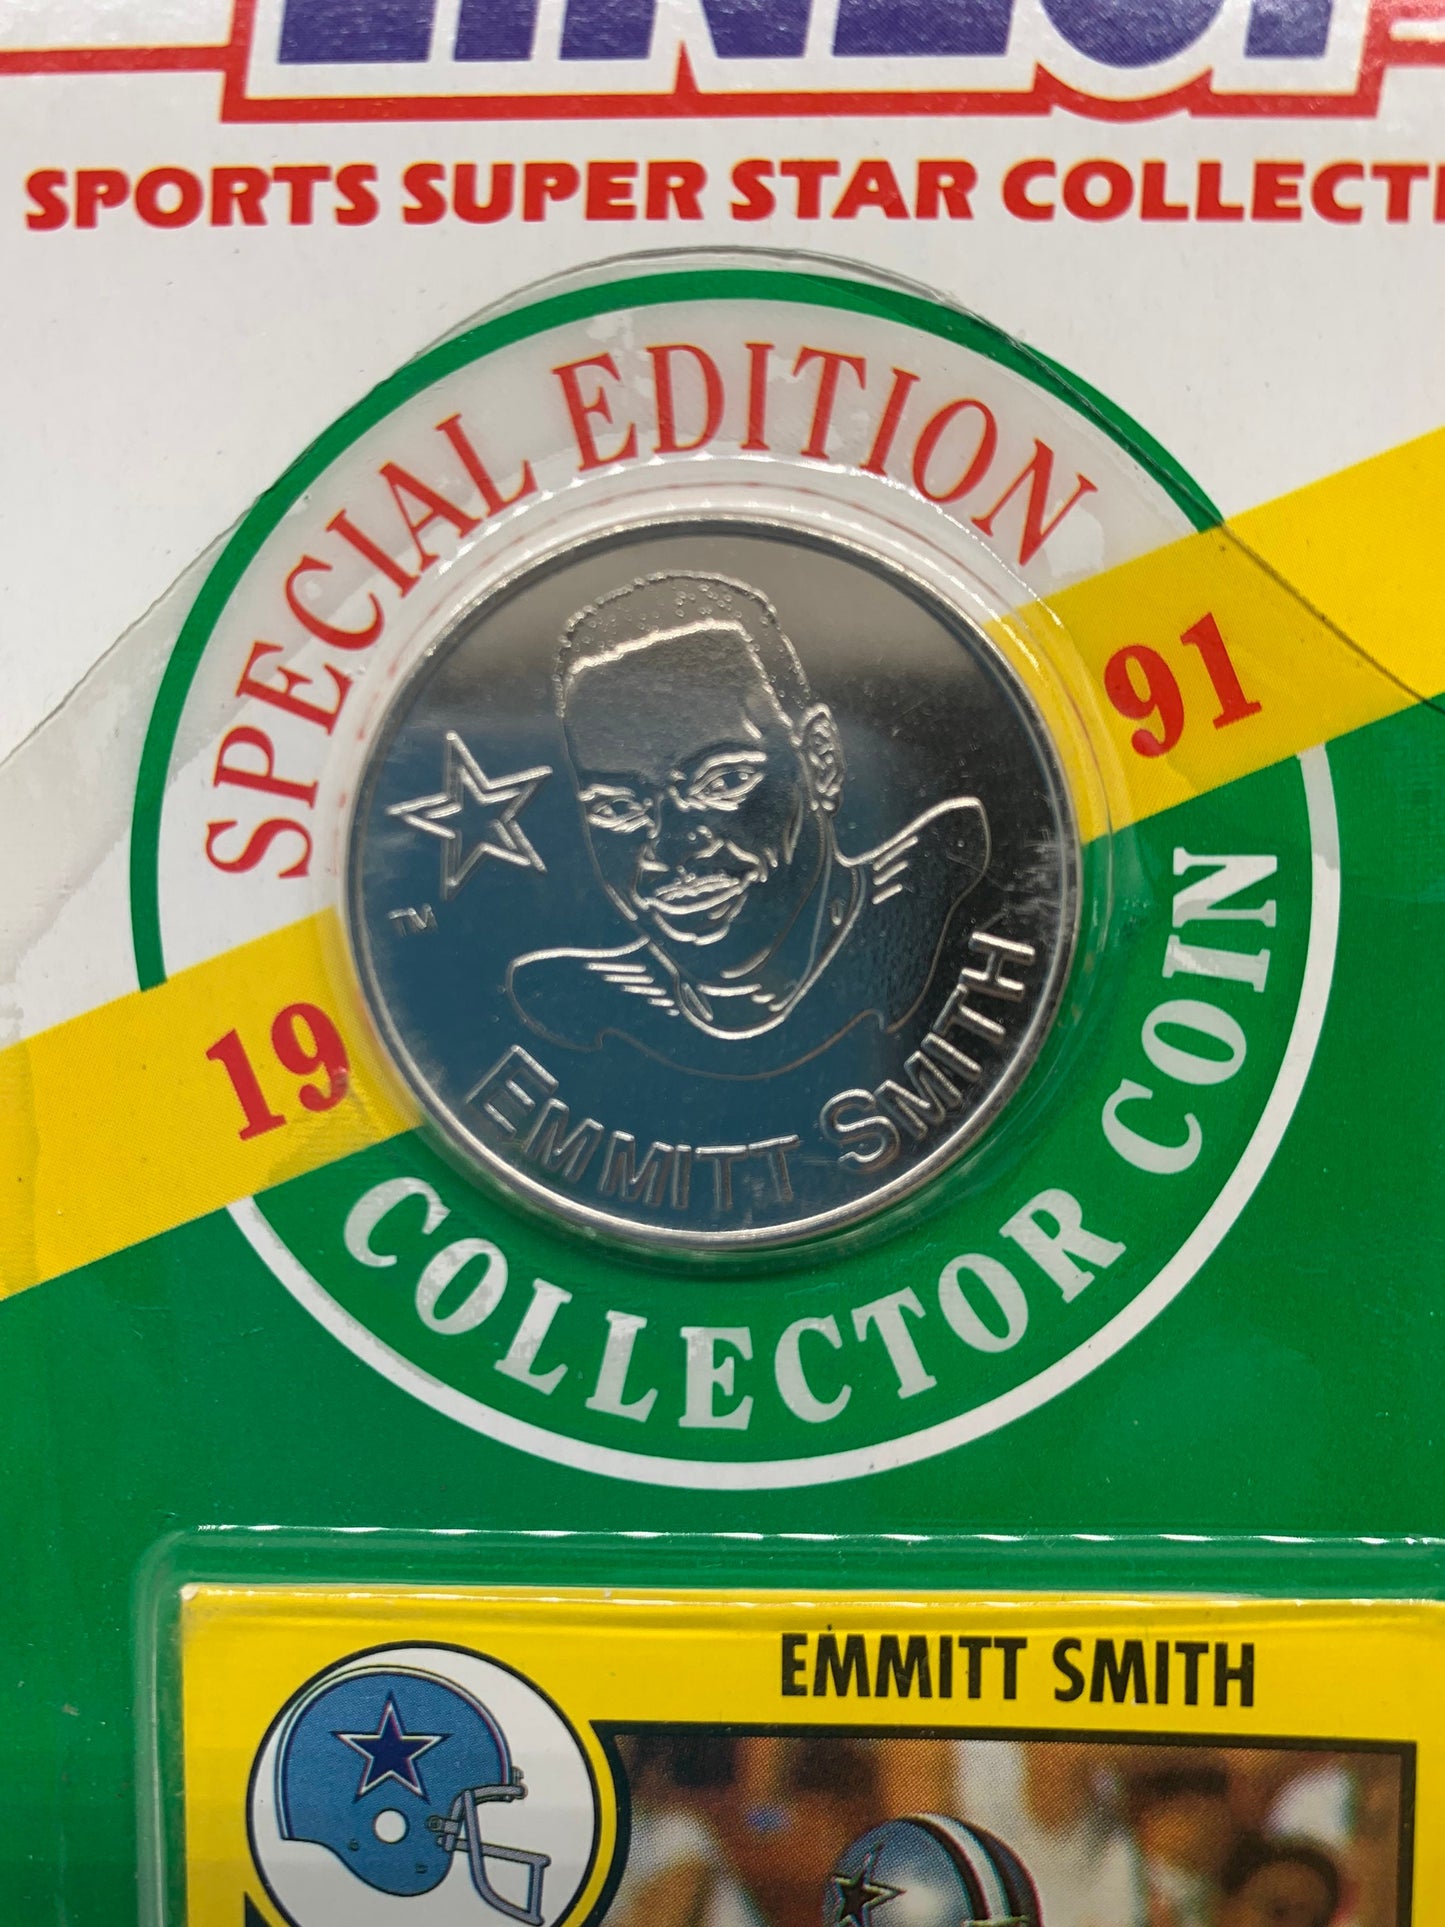 Dallas Cowboys - Emmitt Smith - Sports Figure Vintage - Starting Lineup - Kenner - Man Cave Deco - Sports Memorabilia - Collector Coin